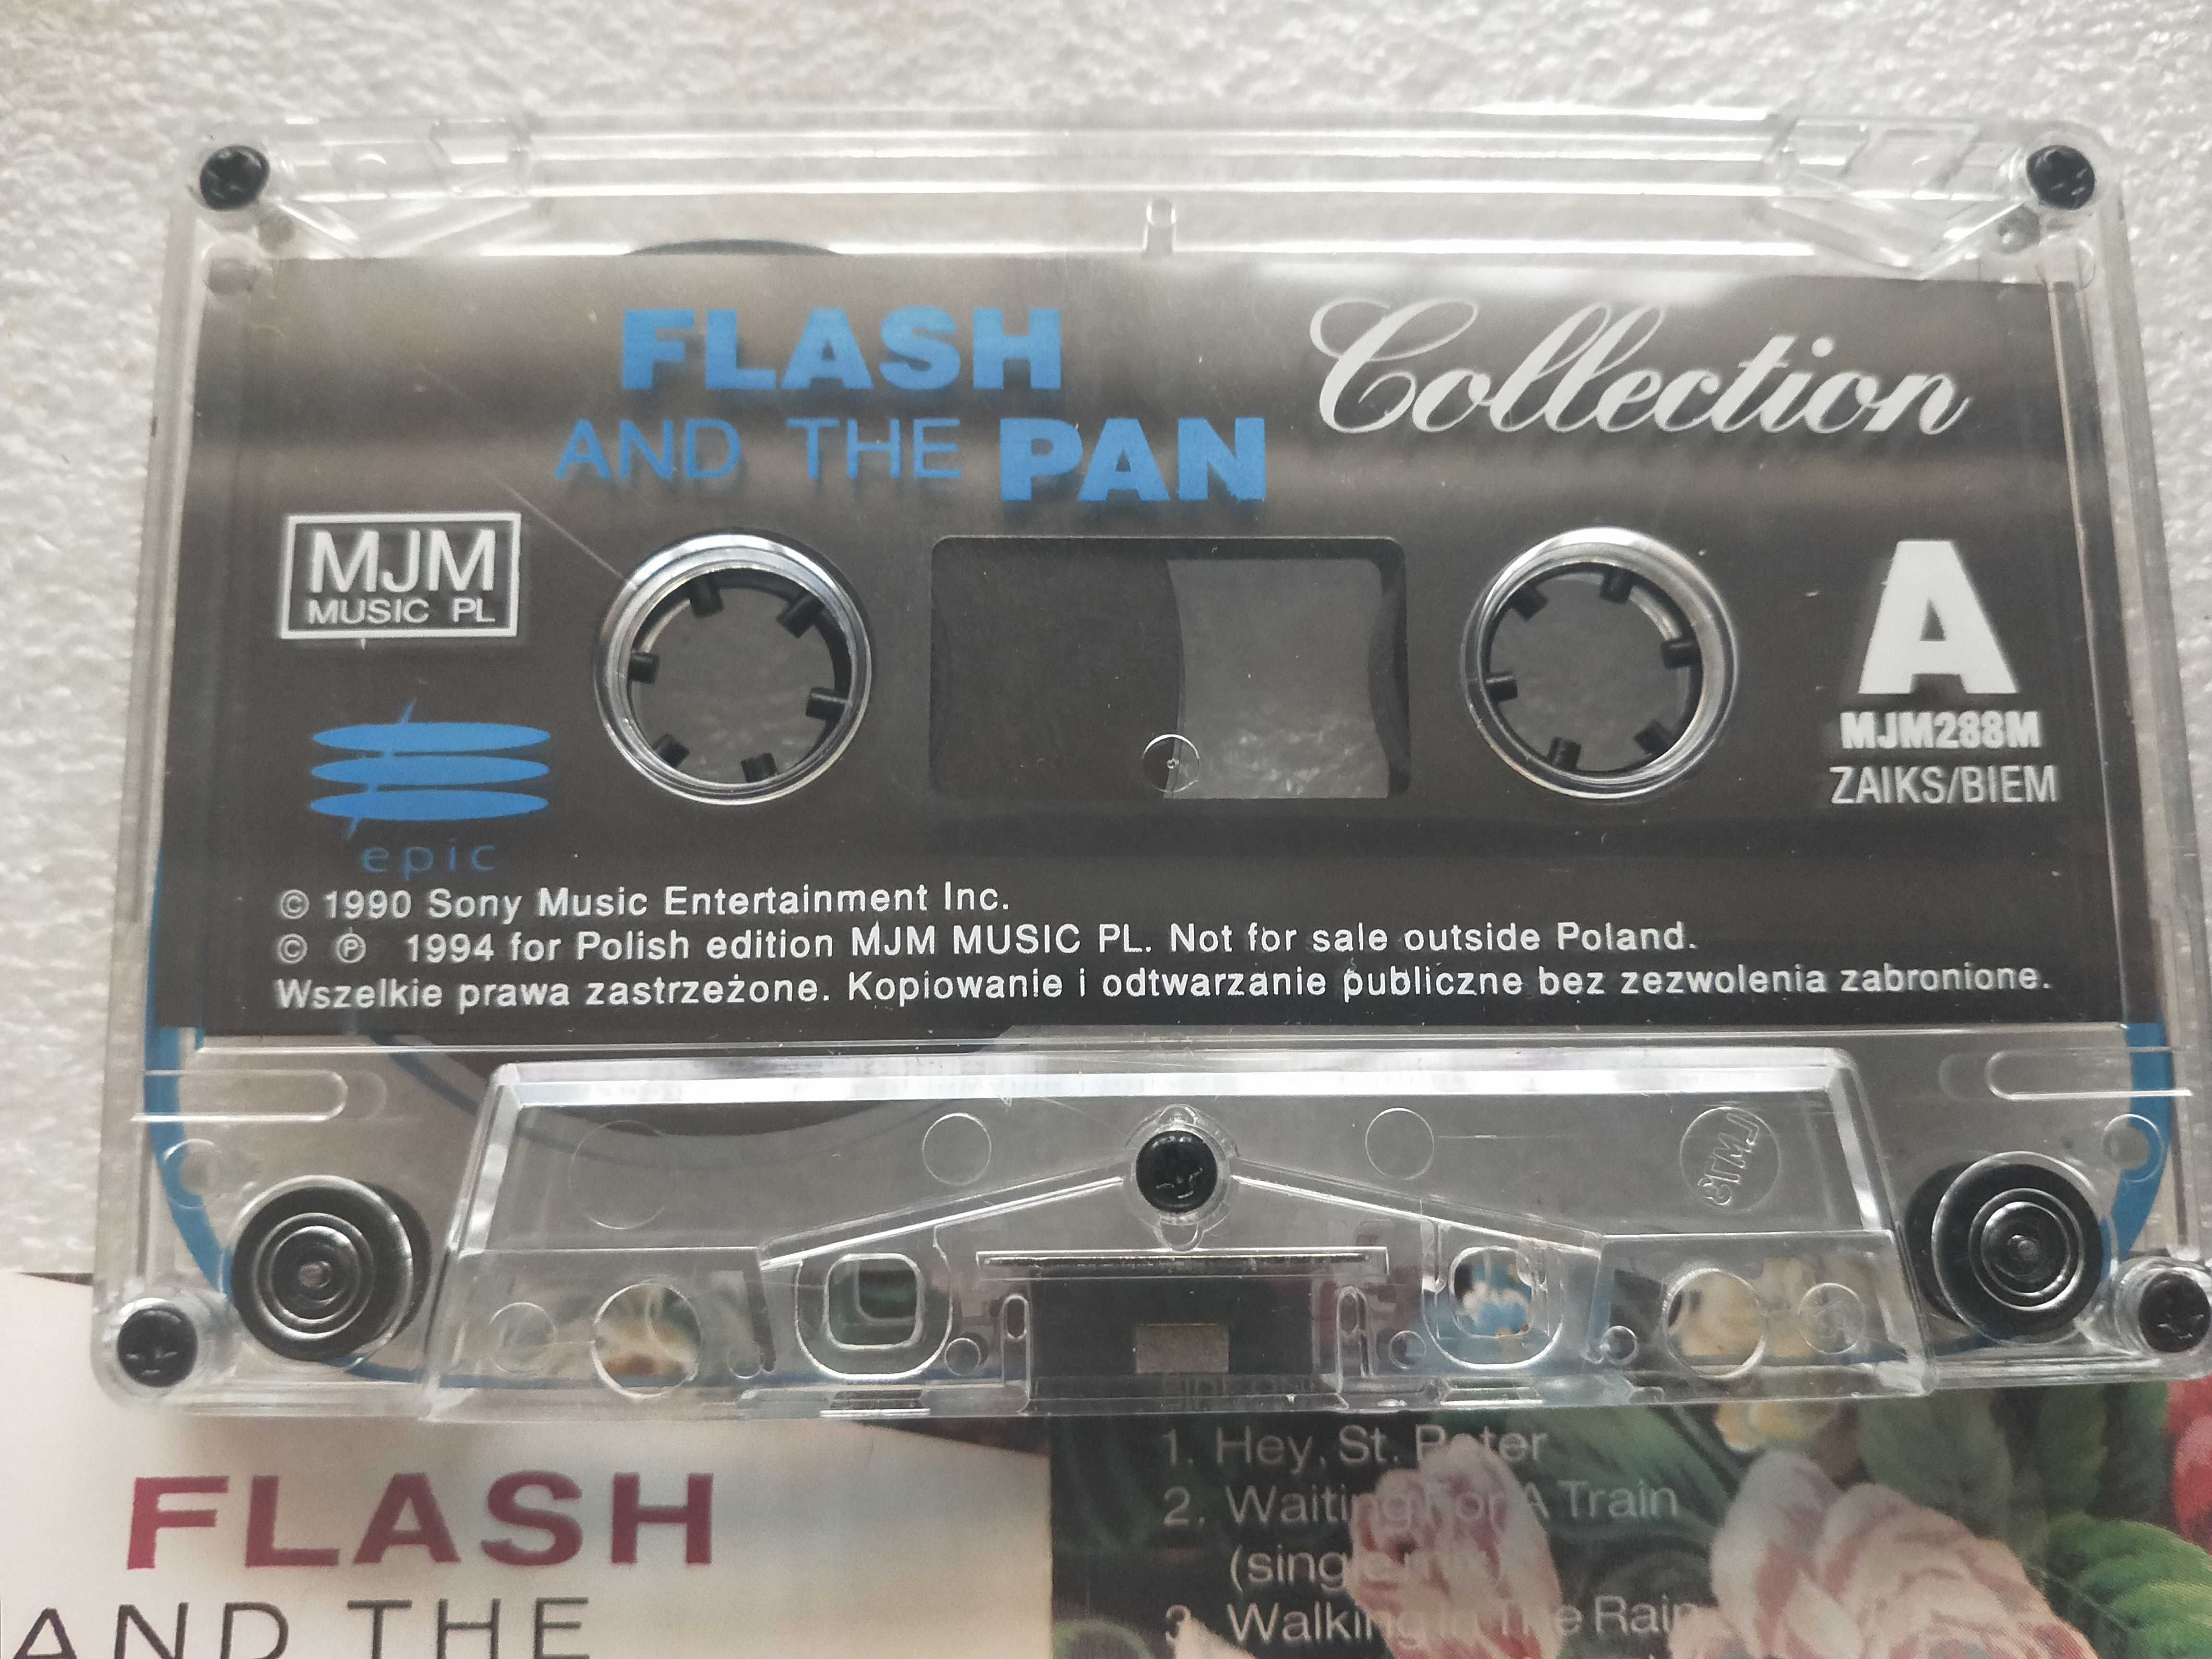 Flash and the Pan - Collection - The best - Kaseta 1994 r. MJM Music